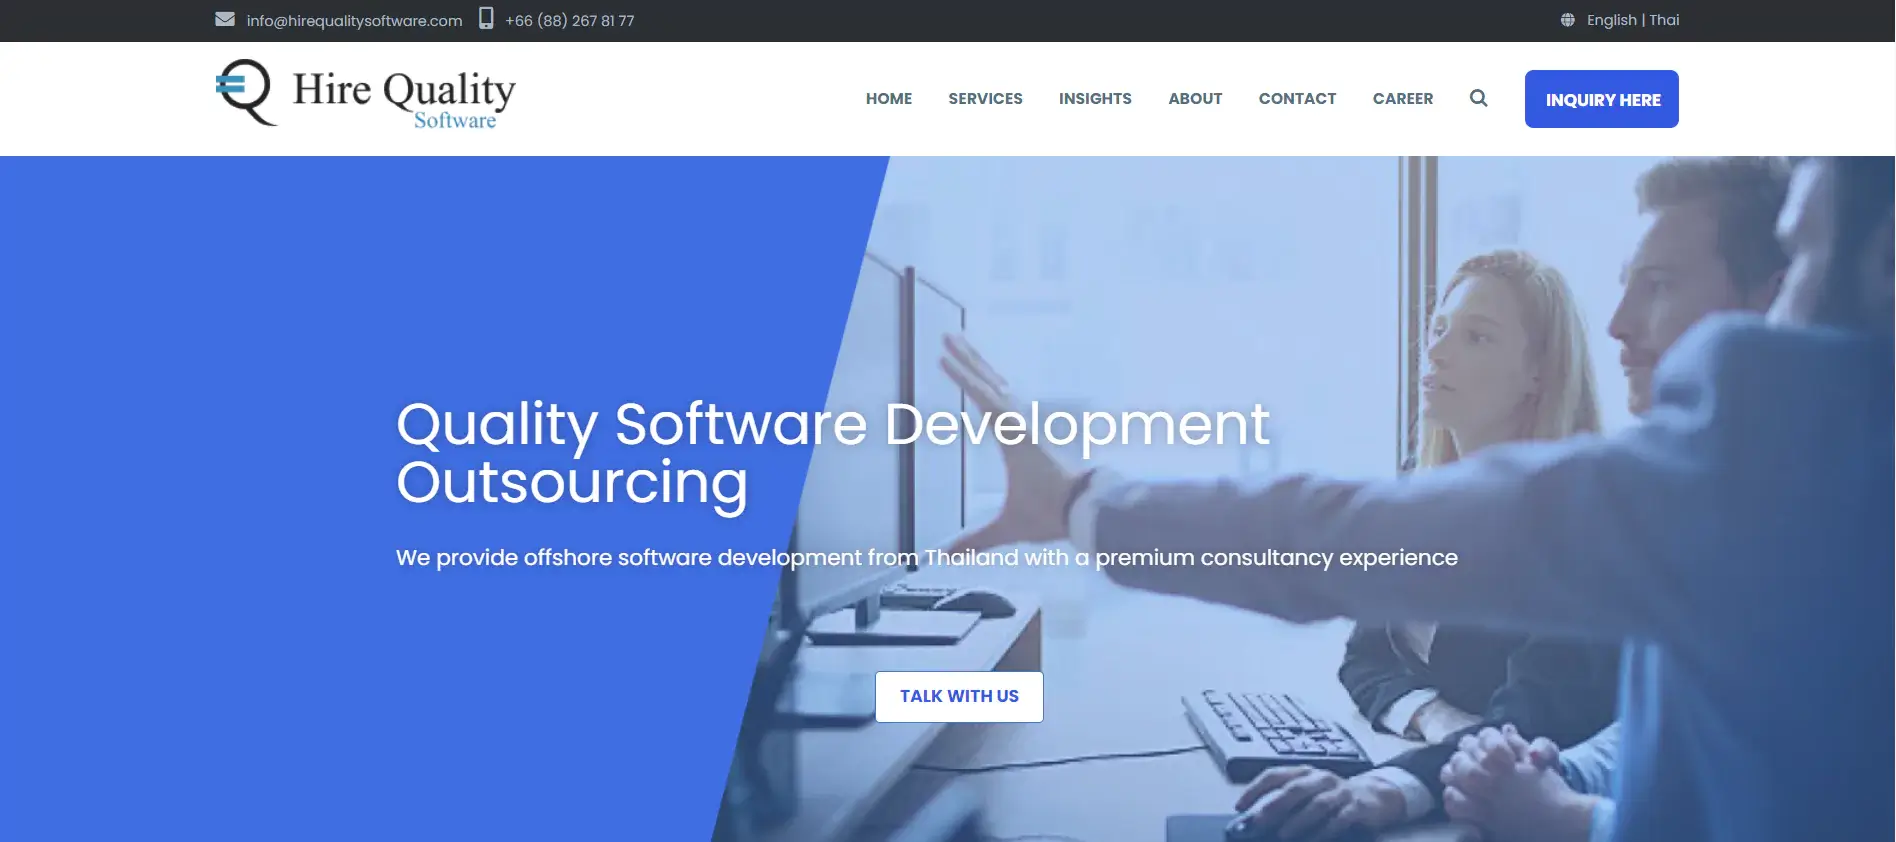 Software Development Company in Thailand - Hire Quality Software